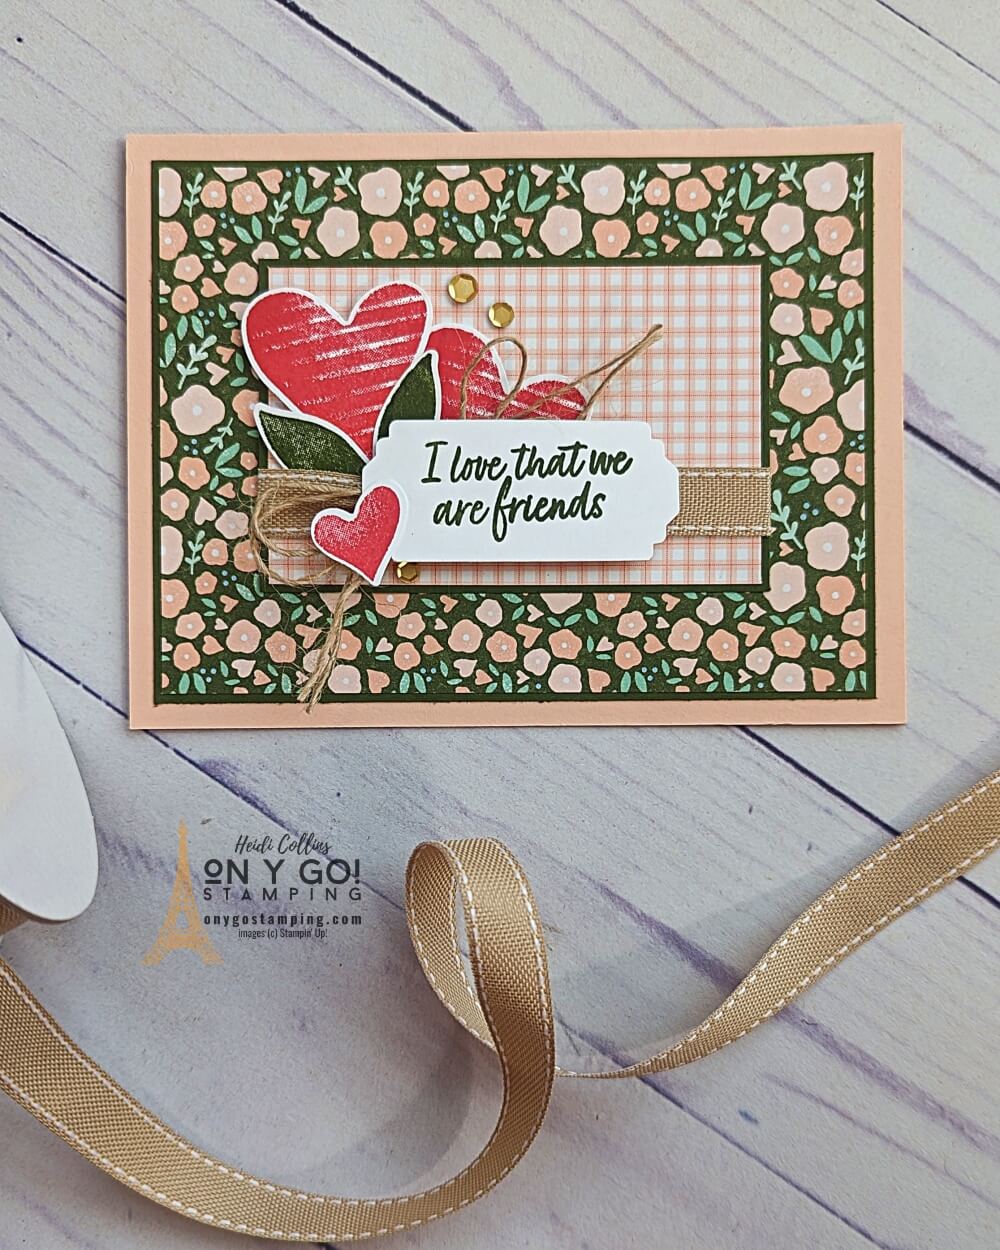 This Valentine's Day, add a special touch to your homemade cards with the Country Bouquet Stamp Set and Punch bundle from Stampin' Up! The set contains a sweet bouquet of hearts and flowers, as well as a coordinating punch to easily cut out the images. Plus, pair it with some beautiful patterned paper to take your card making to the next level. Perfect for showing your friends and family how much they mean to you.